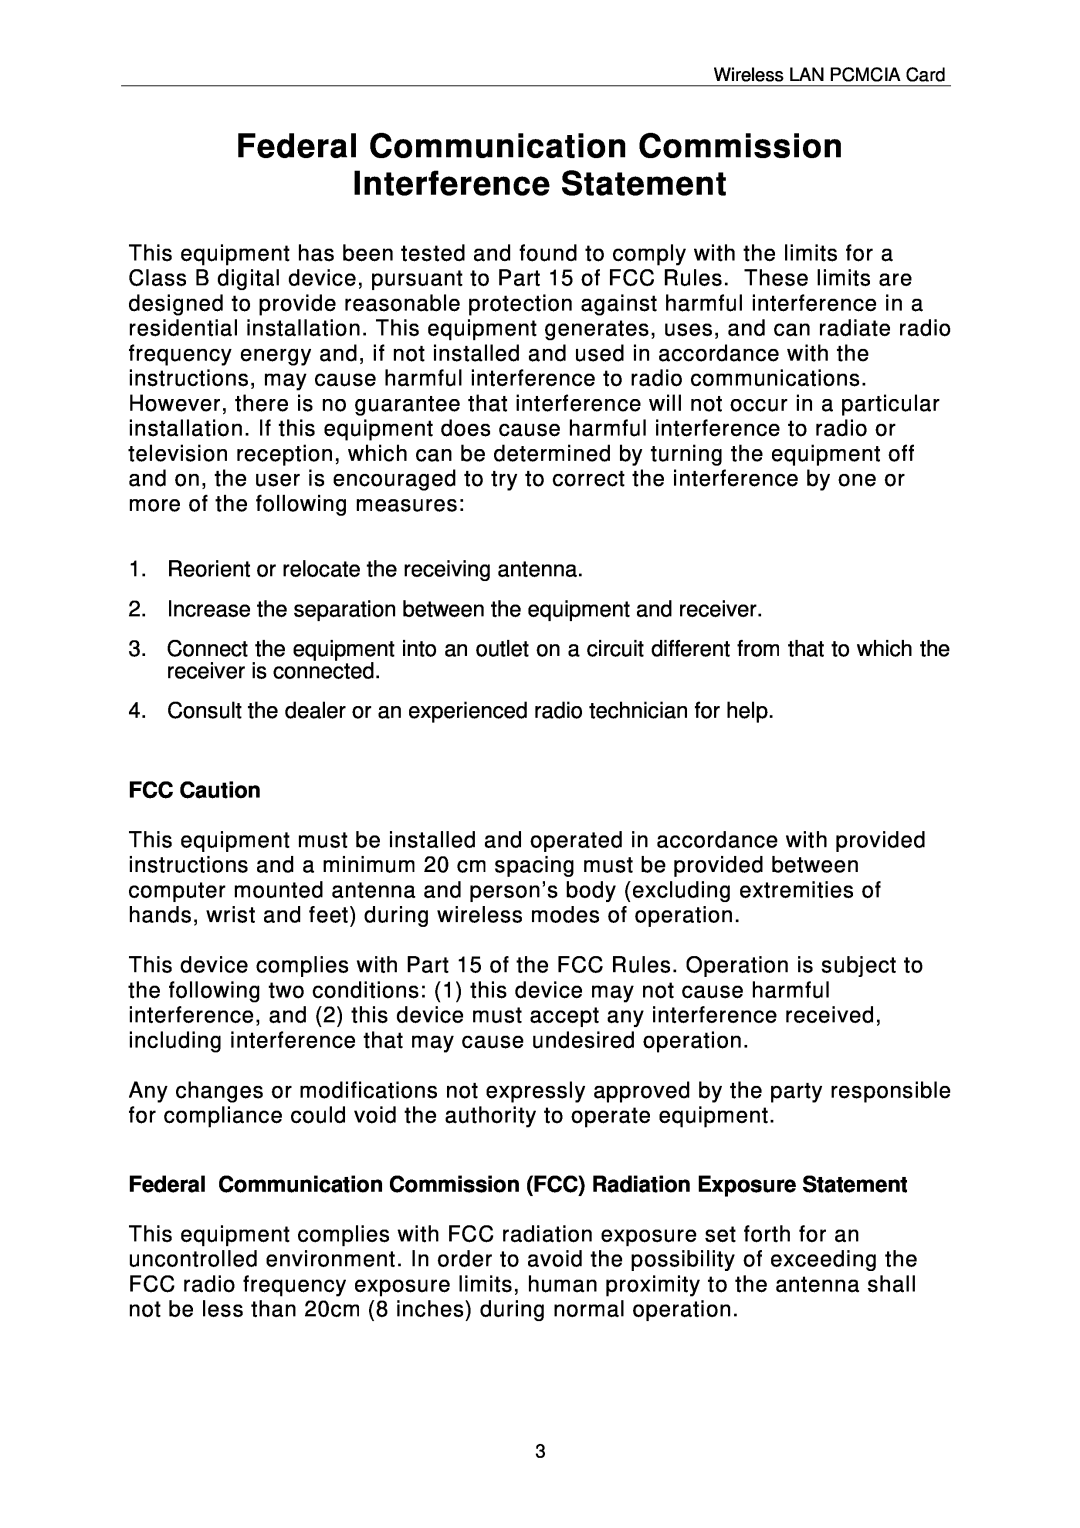 IBM PCMCIA Card user manual Federal Communication Commission Interference Statement, FCC Caution 